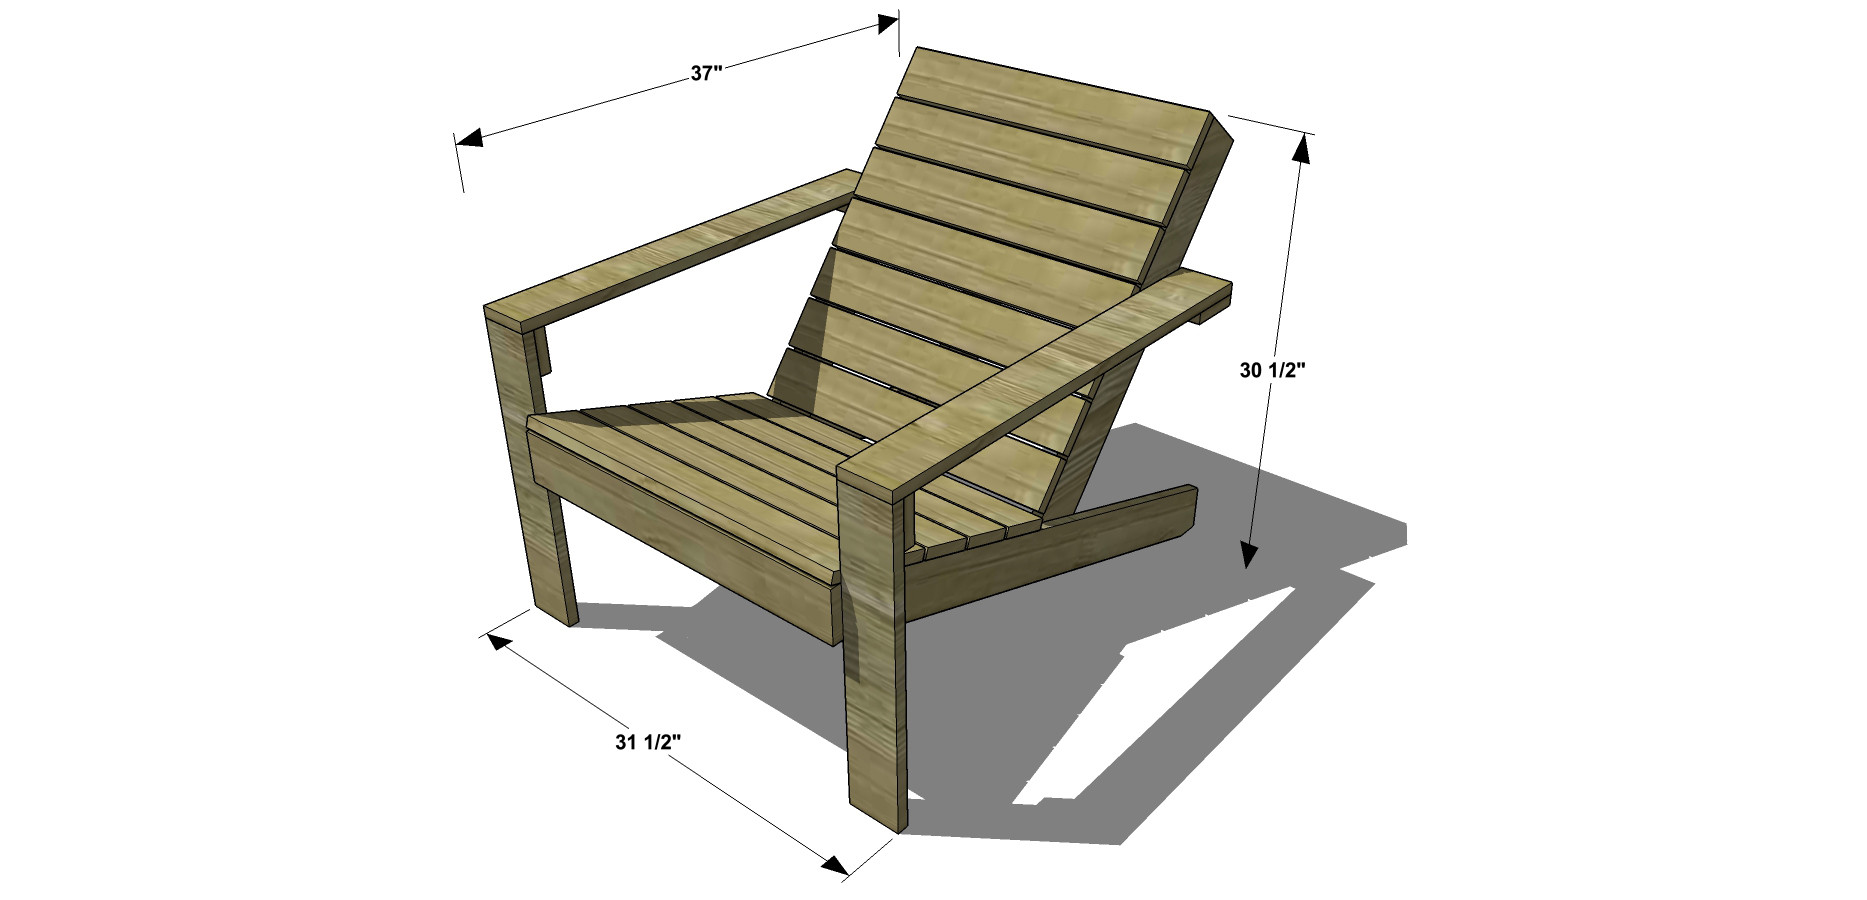 DIY Recliner Plans
 Free DIY Furniture Plans How to Build an Outdoor Modern